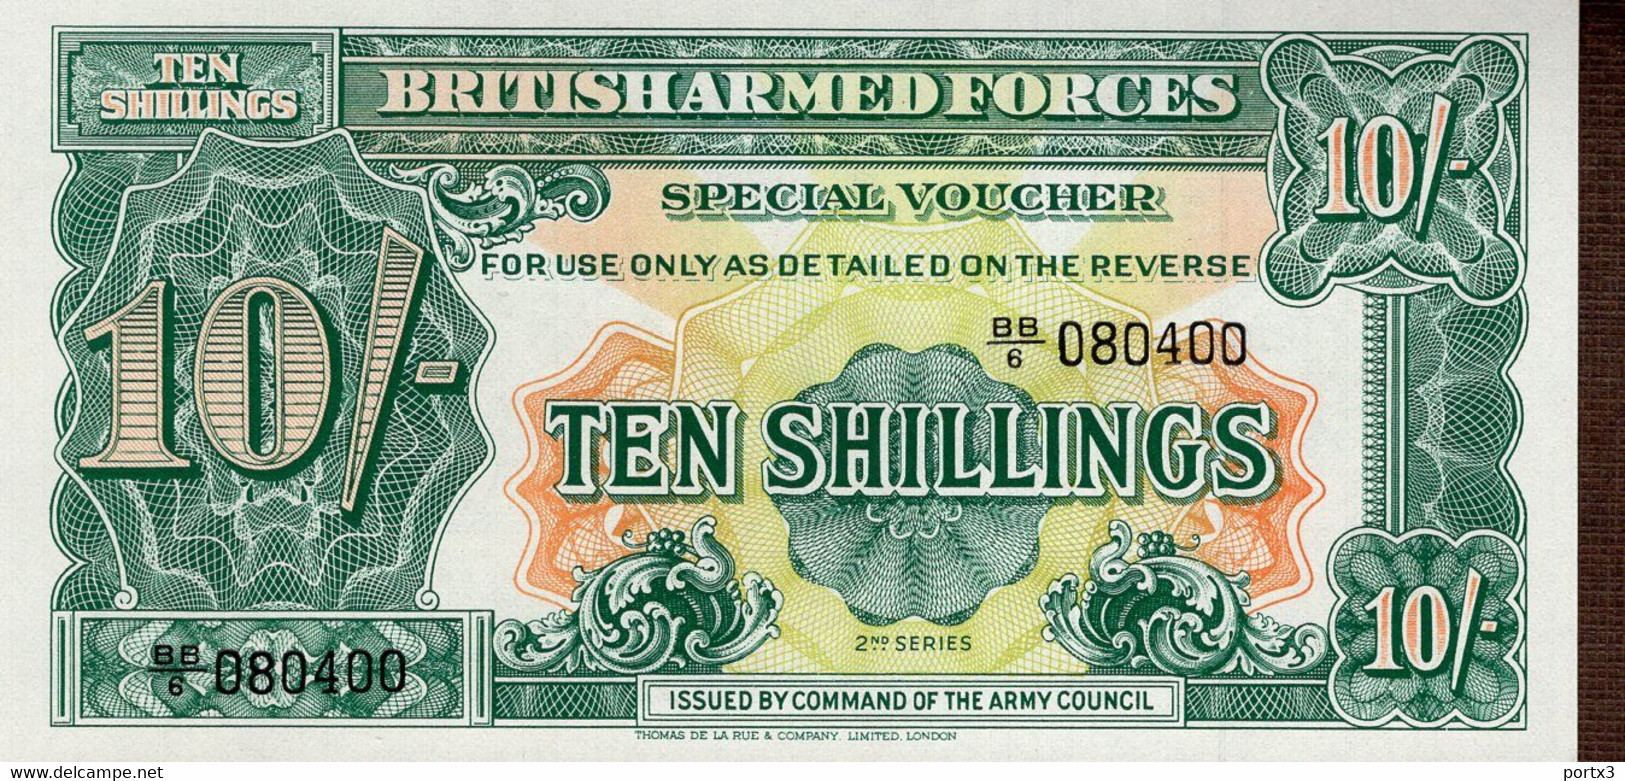 British Banknoten 5 Stück With Ten Shilling BB 6 - British Armed Forces & Special Vouchers